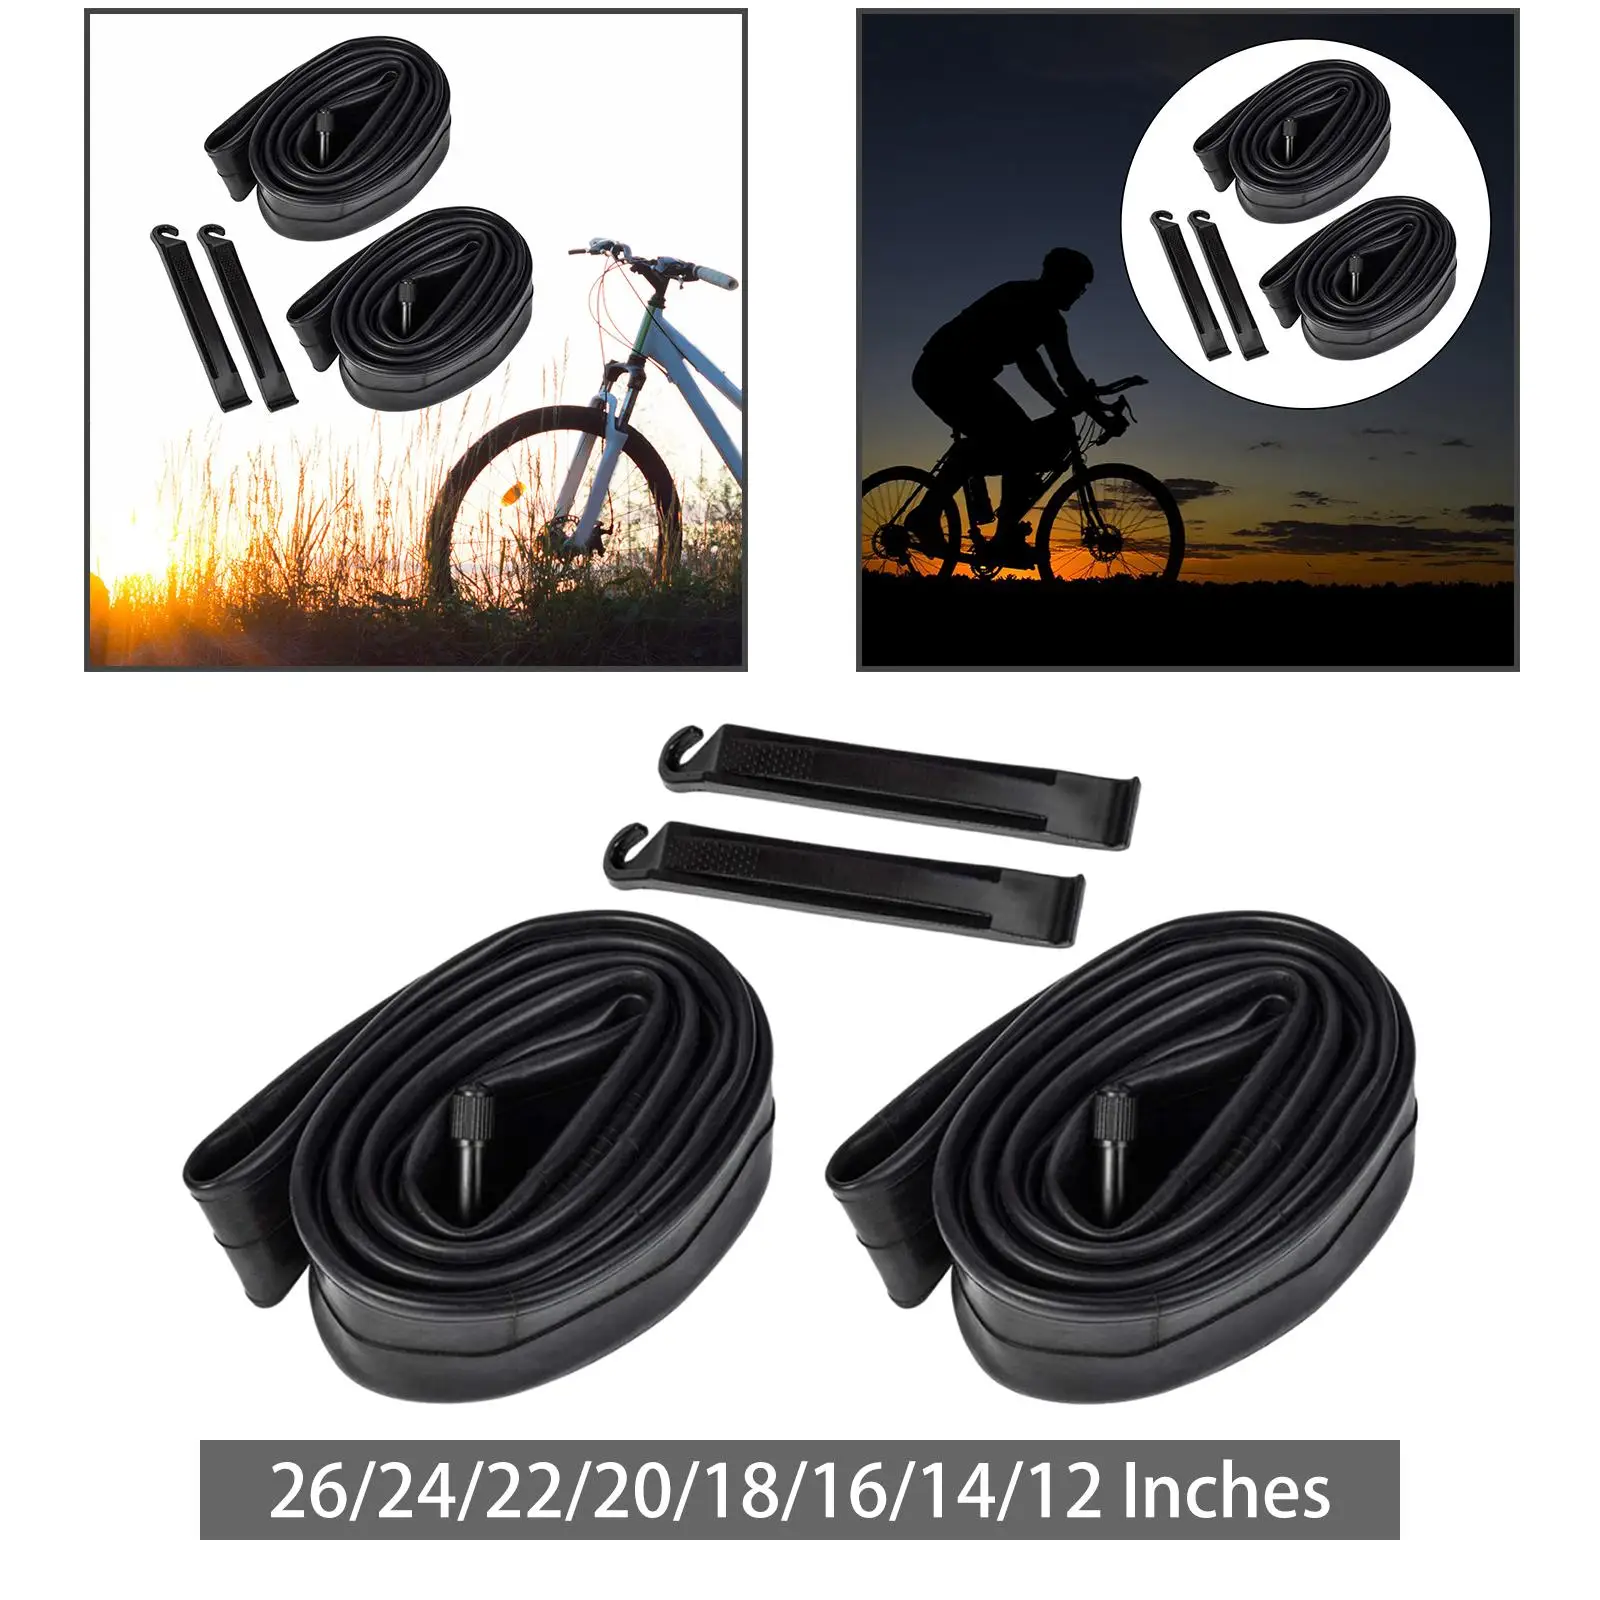 2x Bike Inner Tube Replacement with Tire Levers Bicycle Inner Tube for Mountain Bike Bike Bikes Road Bikes Accessories